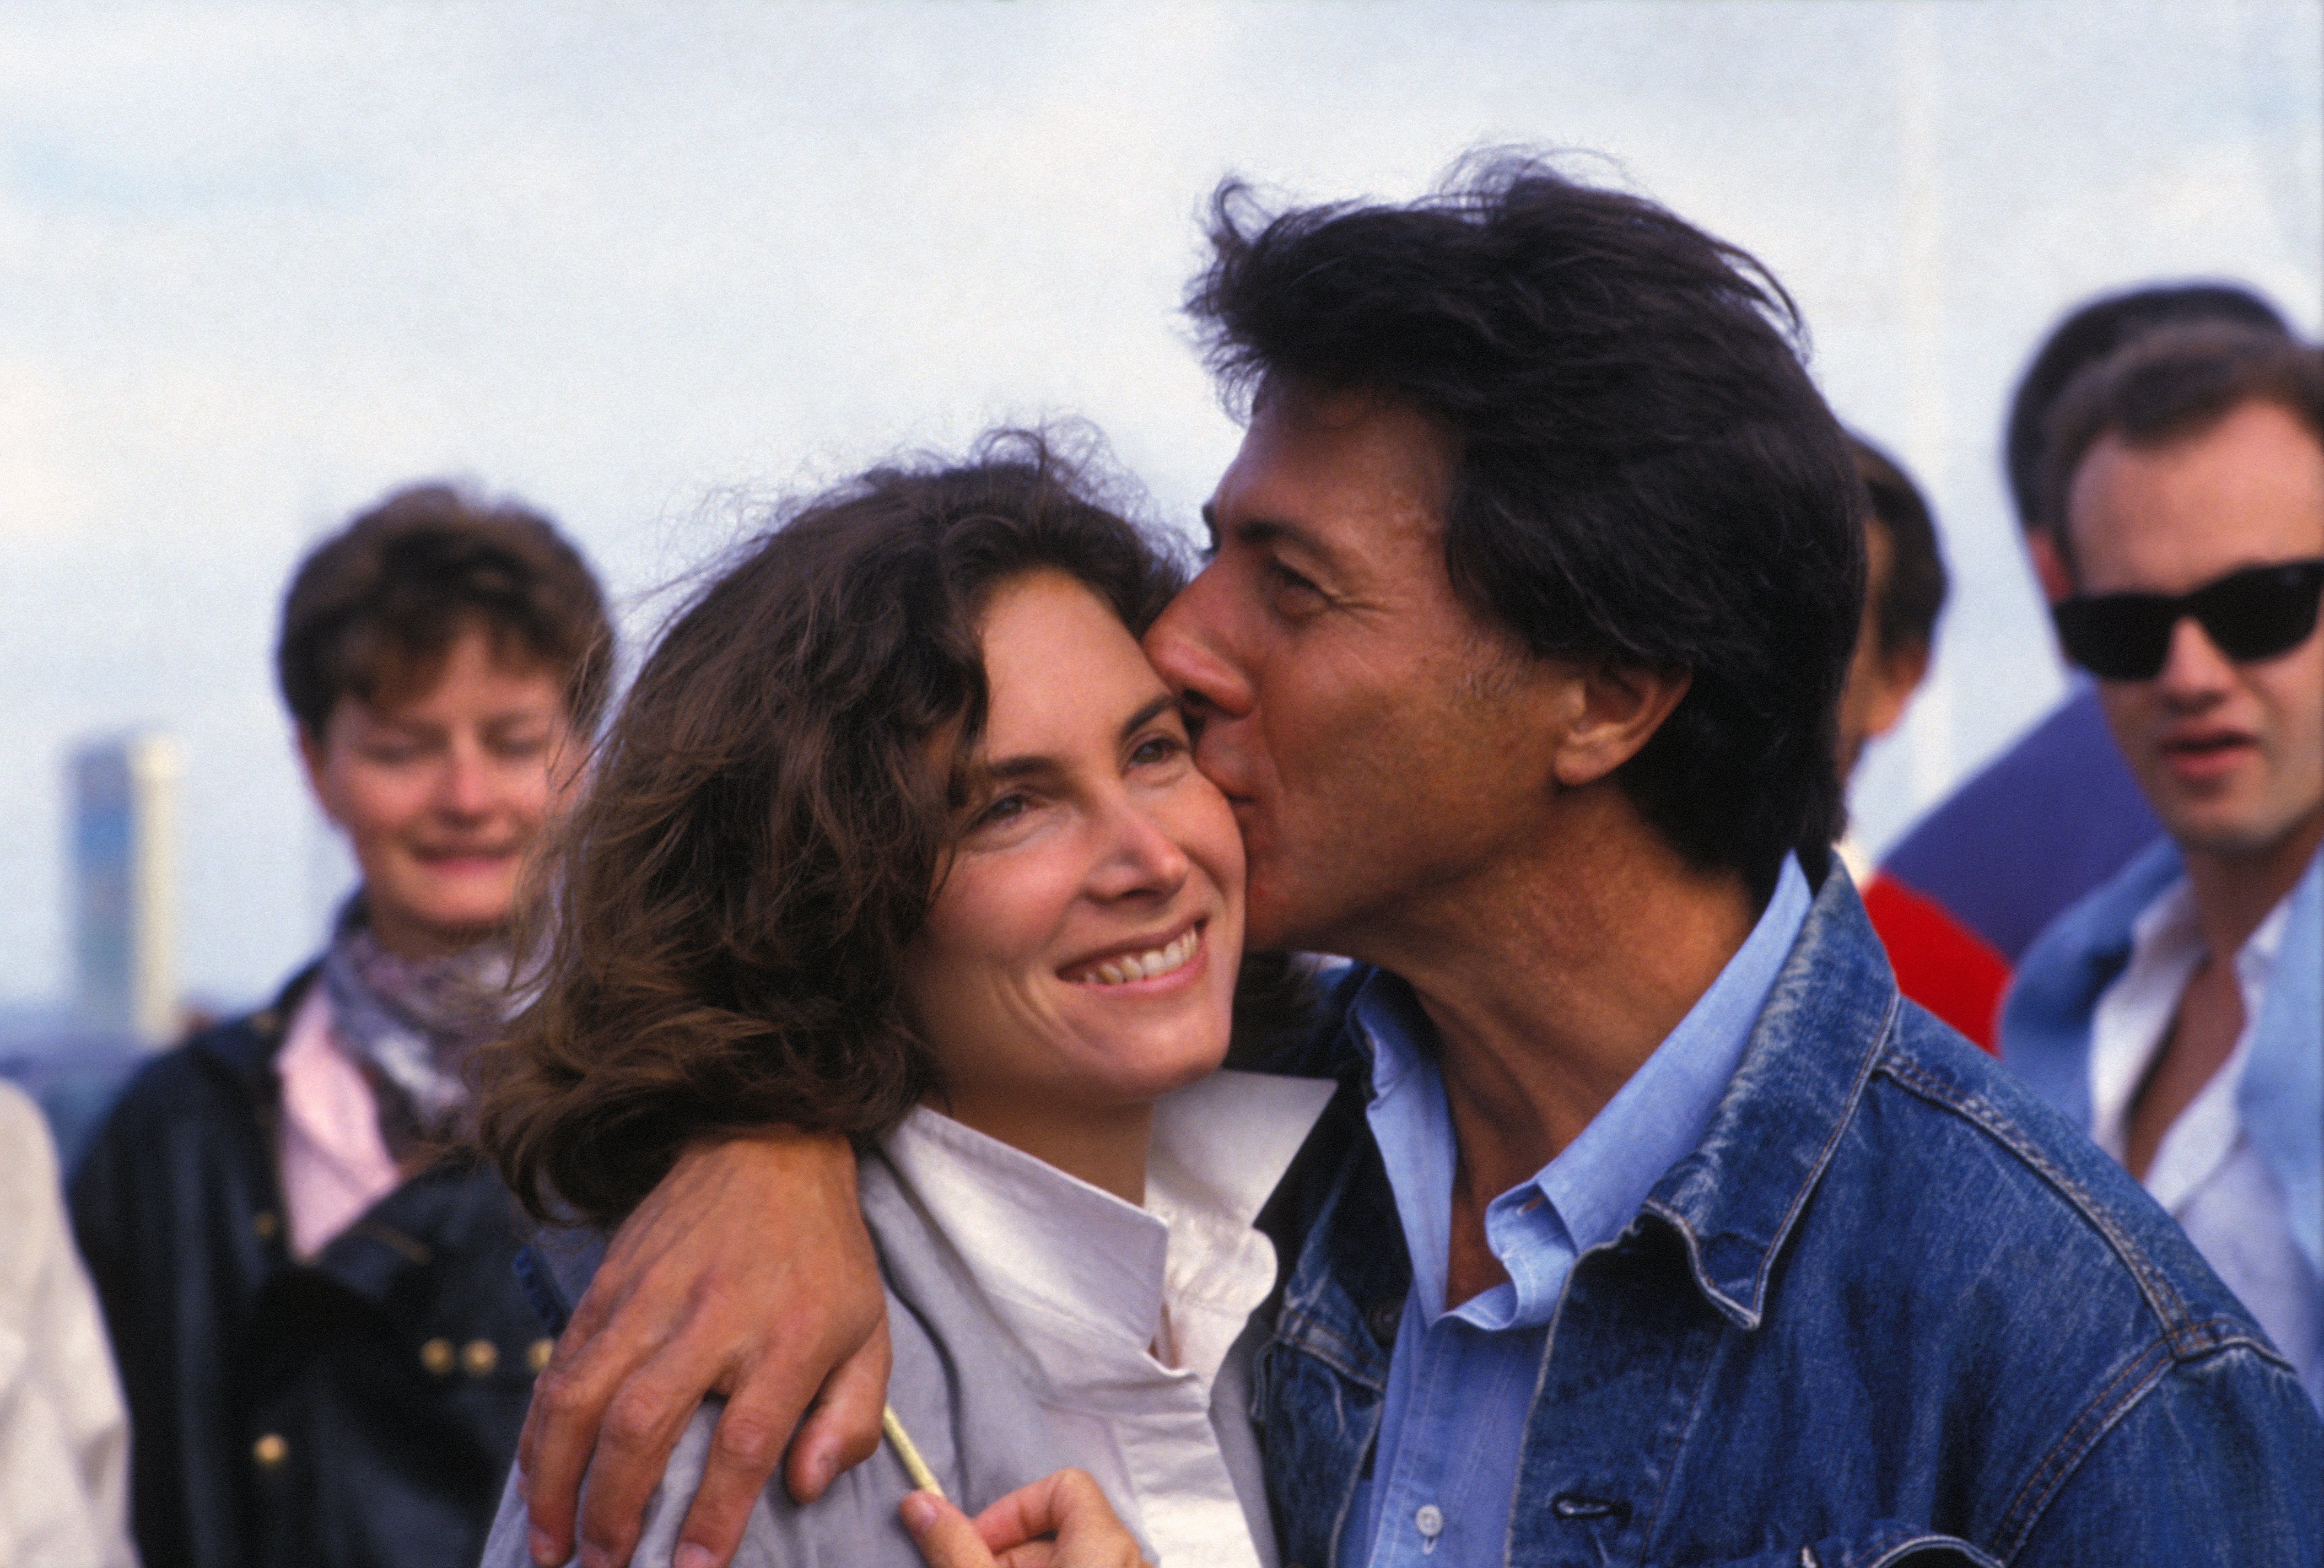 Pictured: Filmmaker Dustin Hoffman and his wife Lisa at the Deauville Festival in 1984, France | Photo: Getty Images